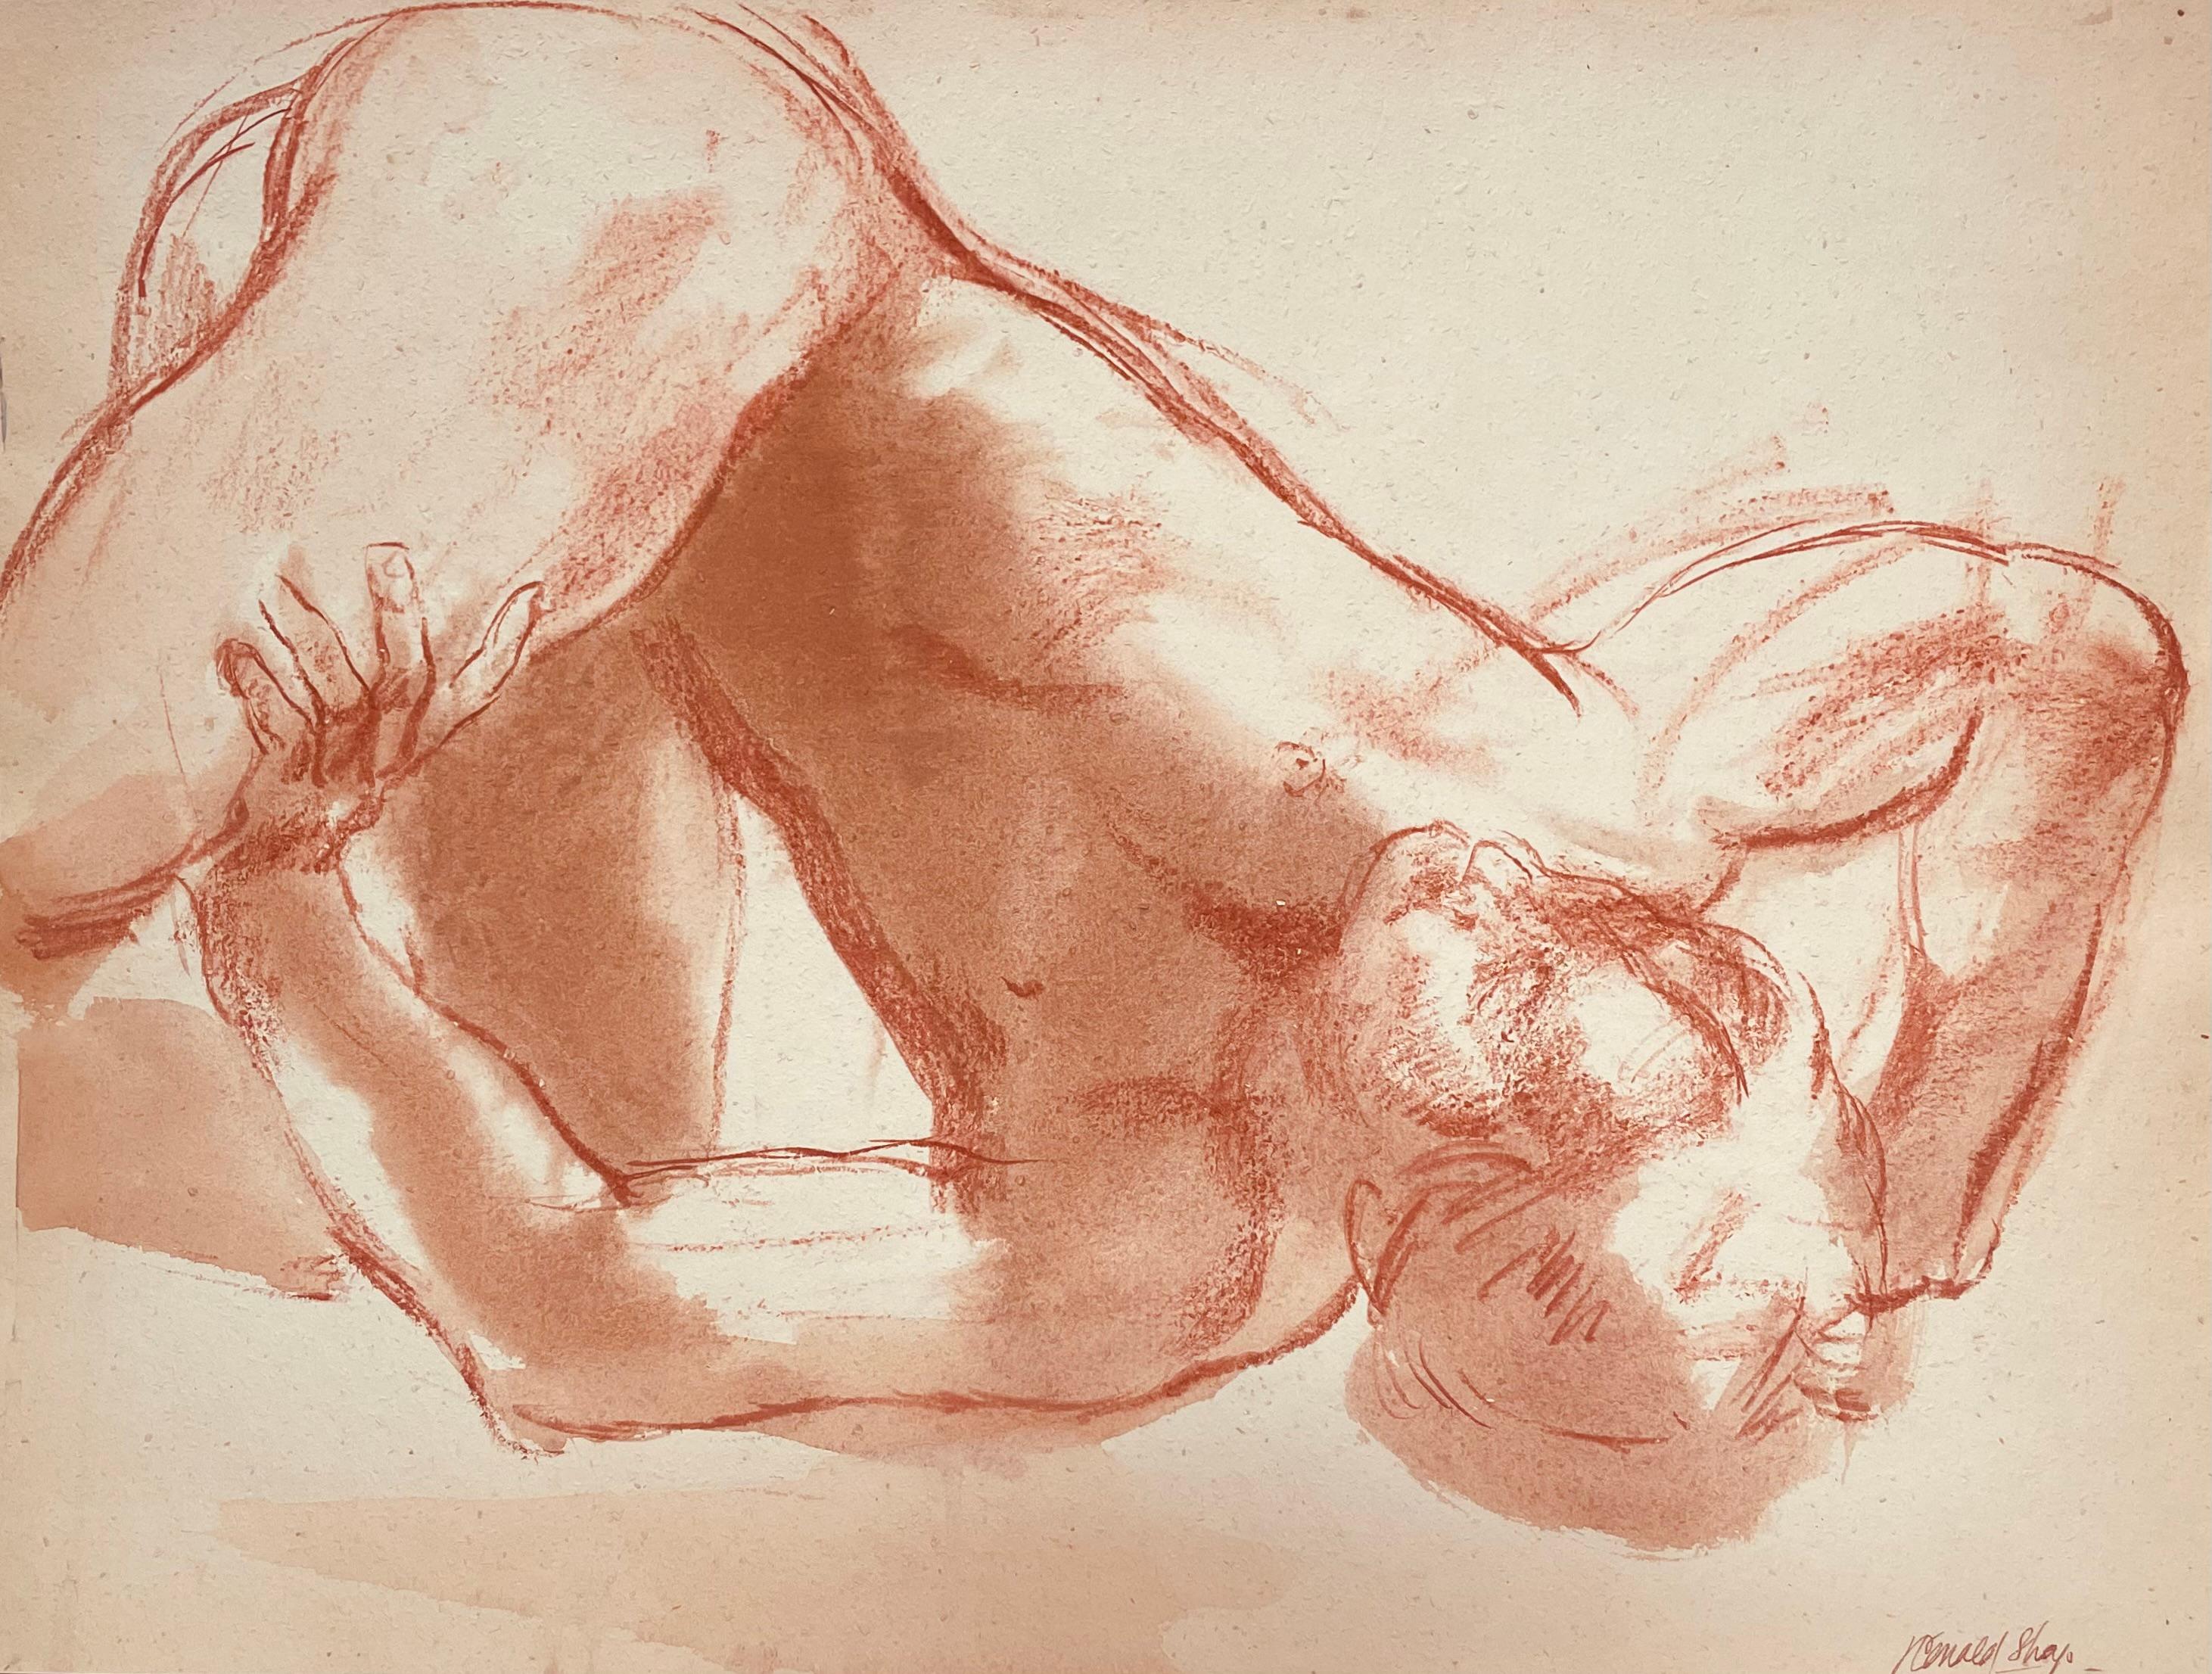 Original oil pastel and gouache figure drawing by celebrated, twentieth-century California landscape painter, Ronald Shap. Sketch of nude man turned sideways. 24x18 inches. Signed.

Two marks on left edge from artist's drawing clipboard, should not